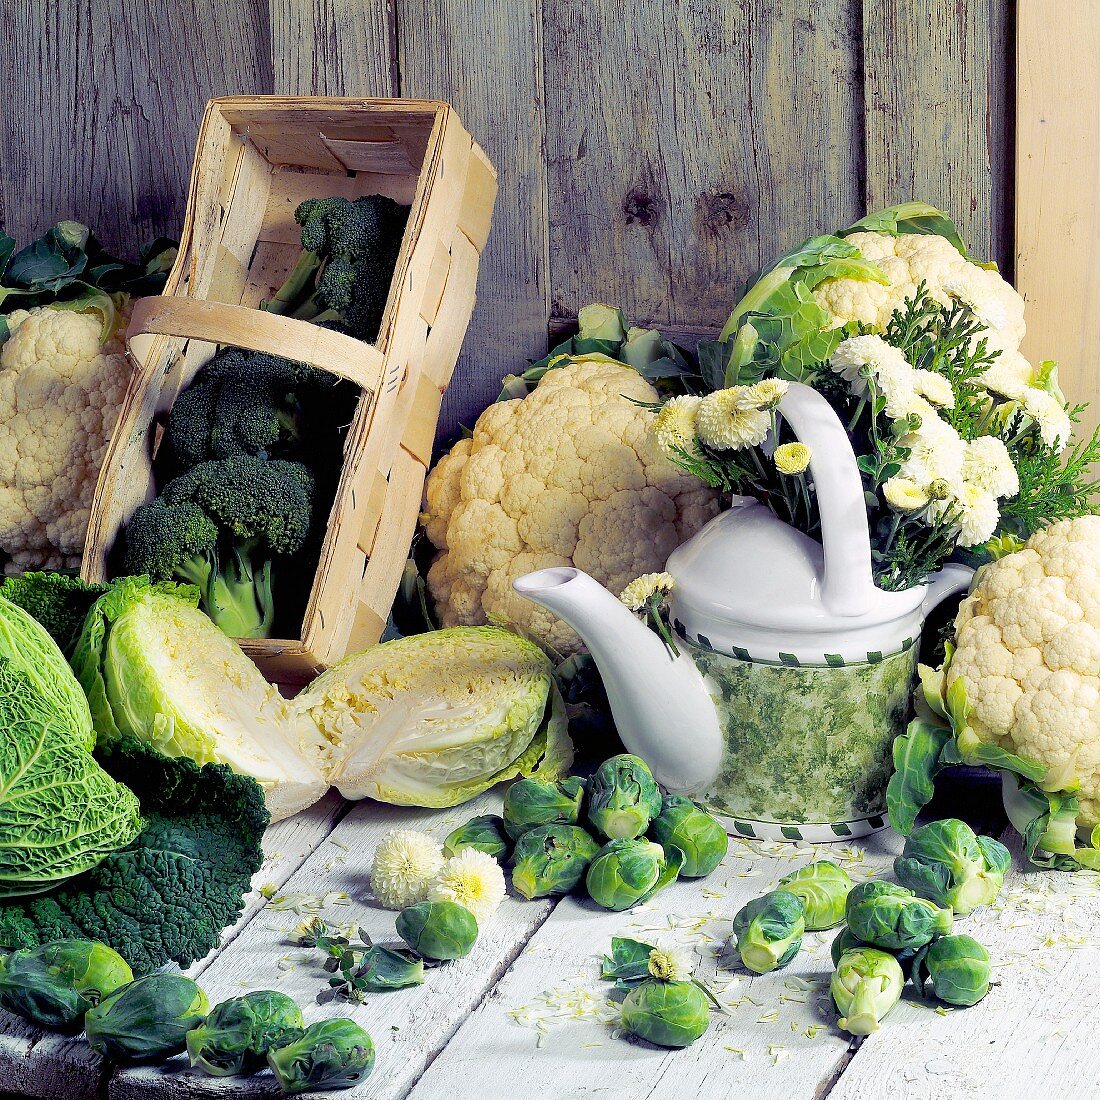 Still life with different types of cabbages